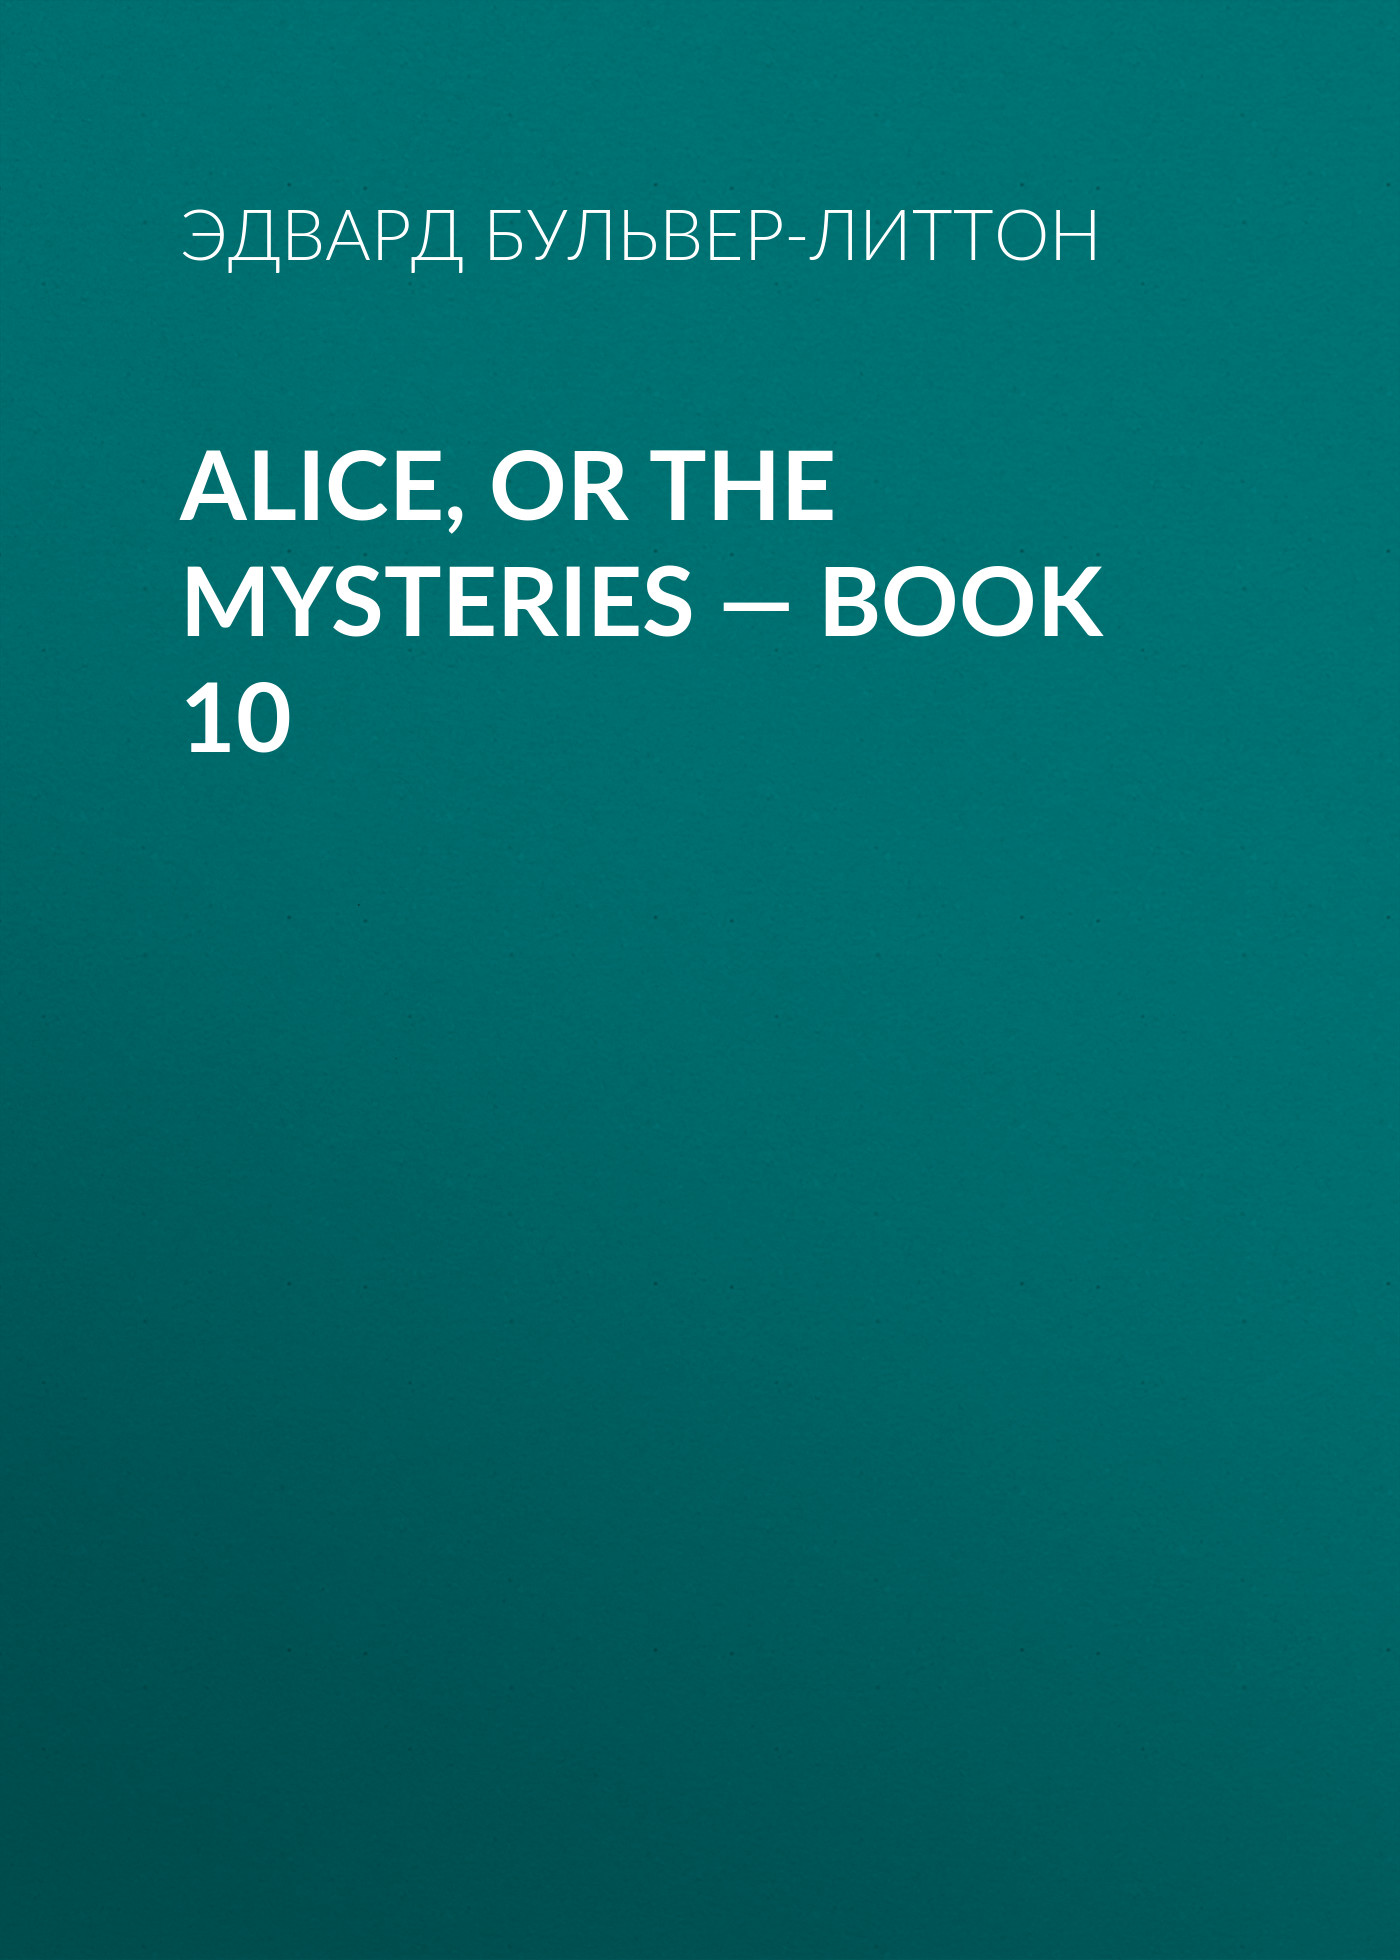 Alice, or the Mysteries— Book 10